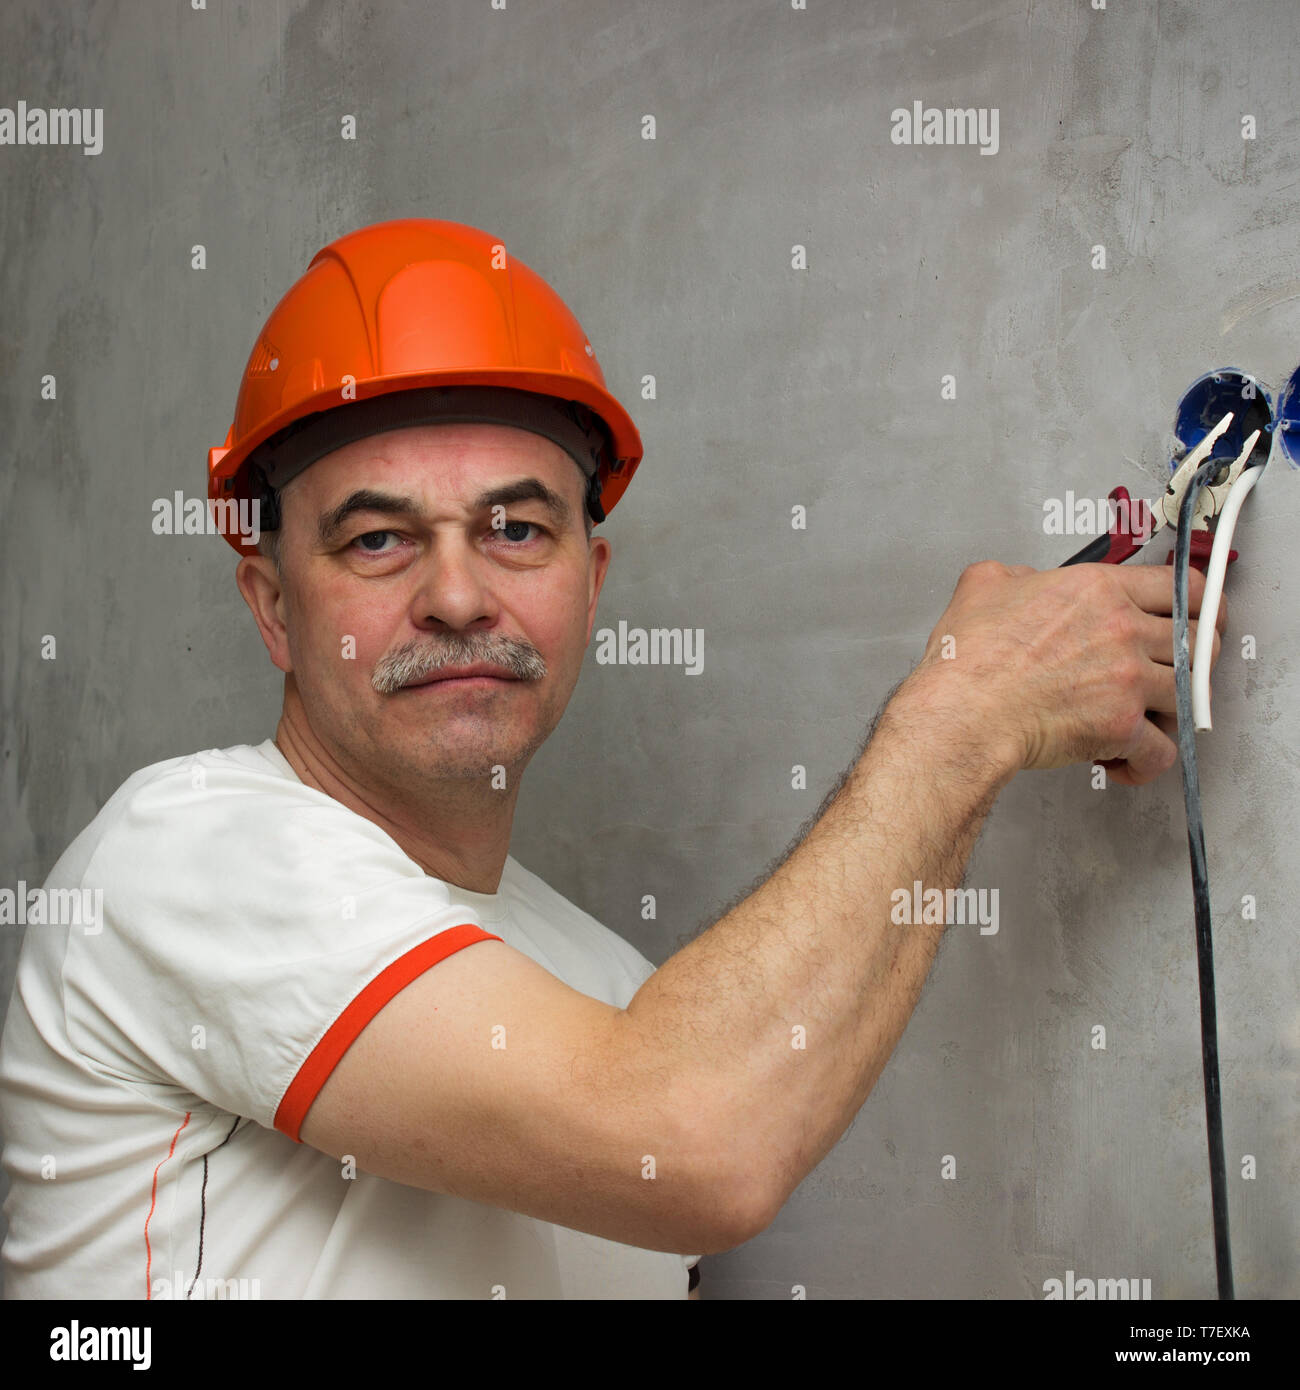 Strange man with a stern face cuts the wiring. Produces deversion Stock Photo